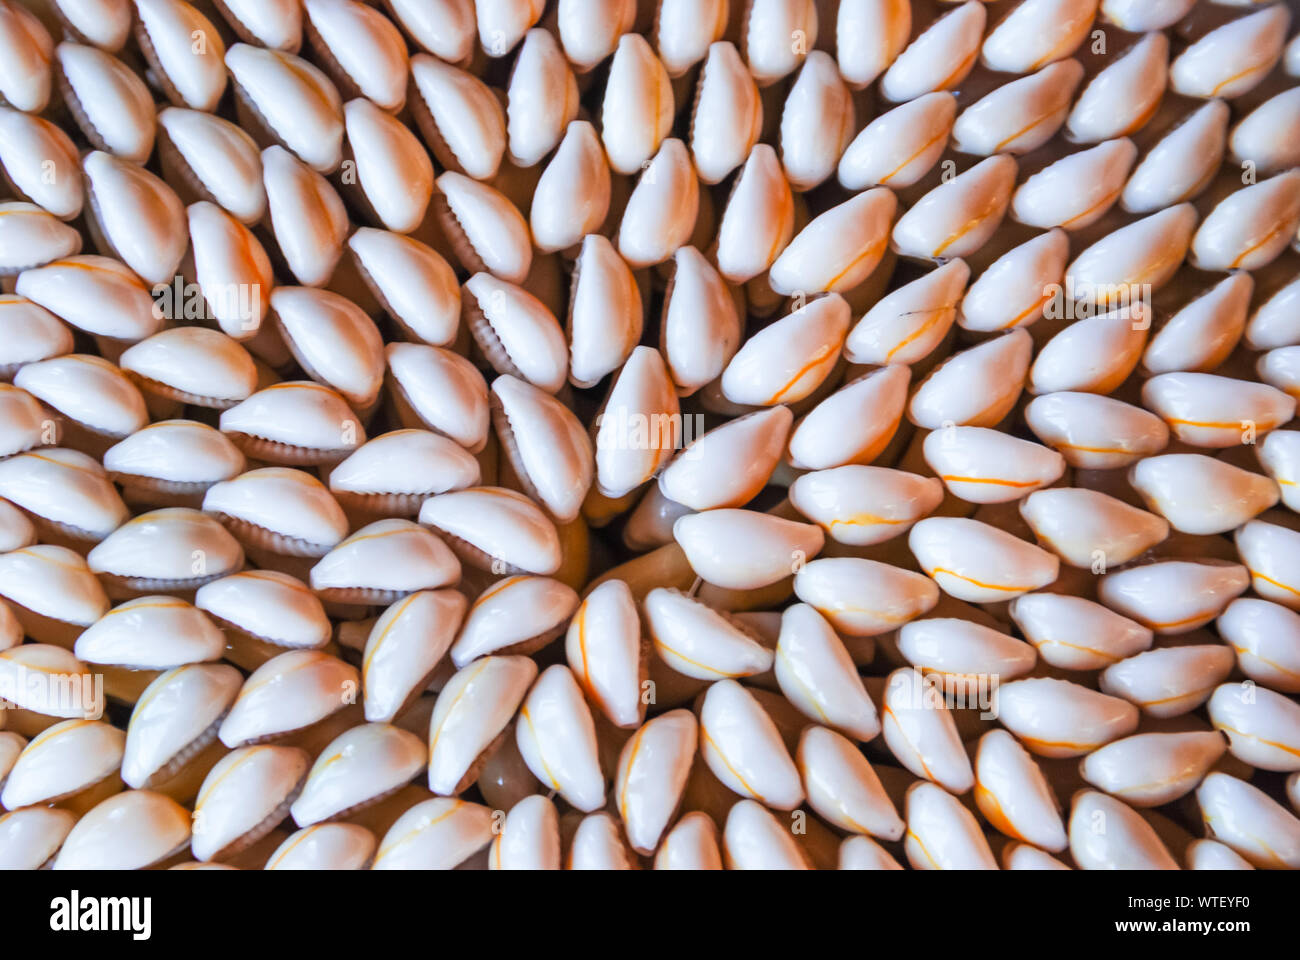 https://c8.alamy.com/comp/WTEYF0/cowrie-or-cowry-shells-used-for-decorating-apparels-texture-WTEYF0.jpg